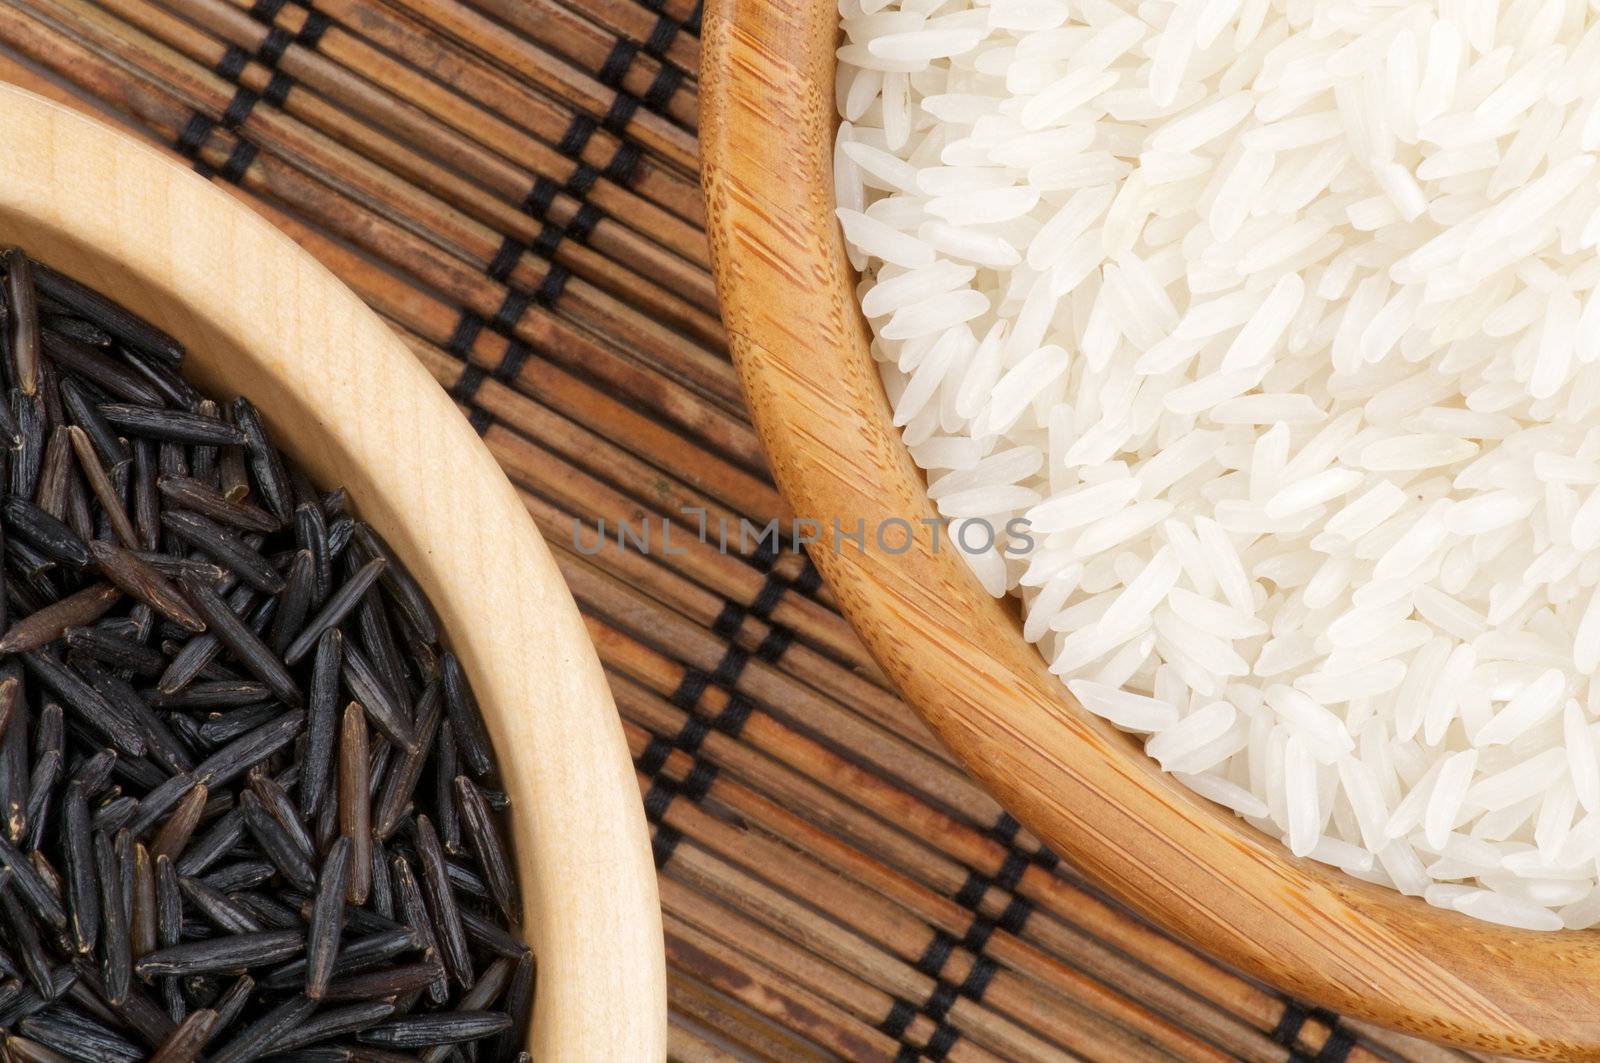 Arrangement of white and brown rice in wooden bowls closeup on strawmat background